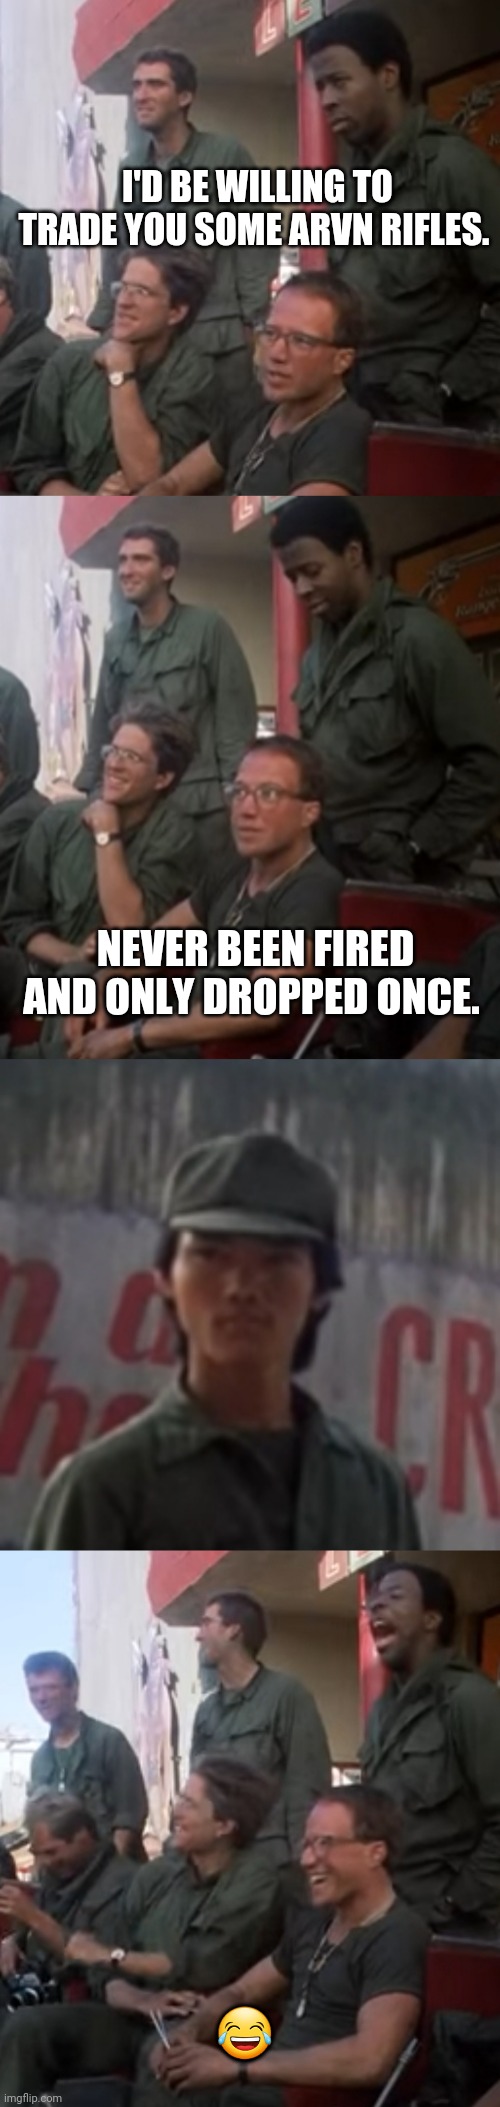 Here's to communism. | I'D BE WILLING TO TRADE YOU SOME ARVN RIFLES. NEVER BEEN FIRED AND ONLY DROPPED ONCE. 😂 | image tagged in full metal jacket,communism,vietnam,communist,assault weapons,chinese | made w/ Imgflip meme maker